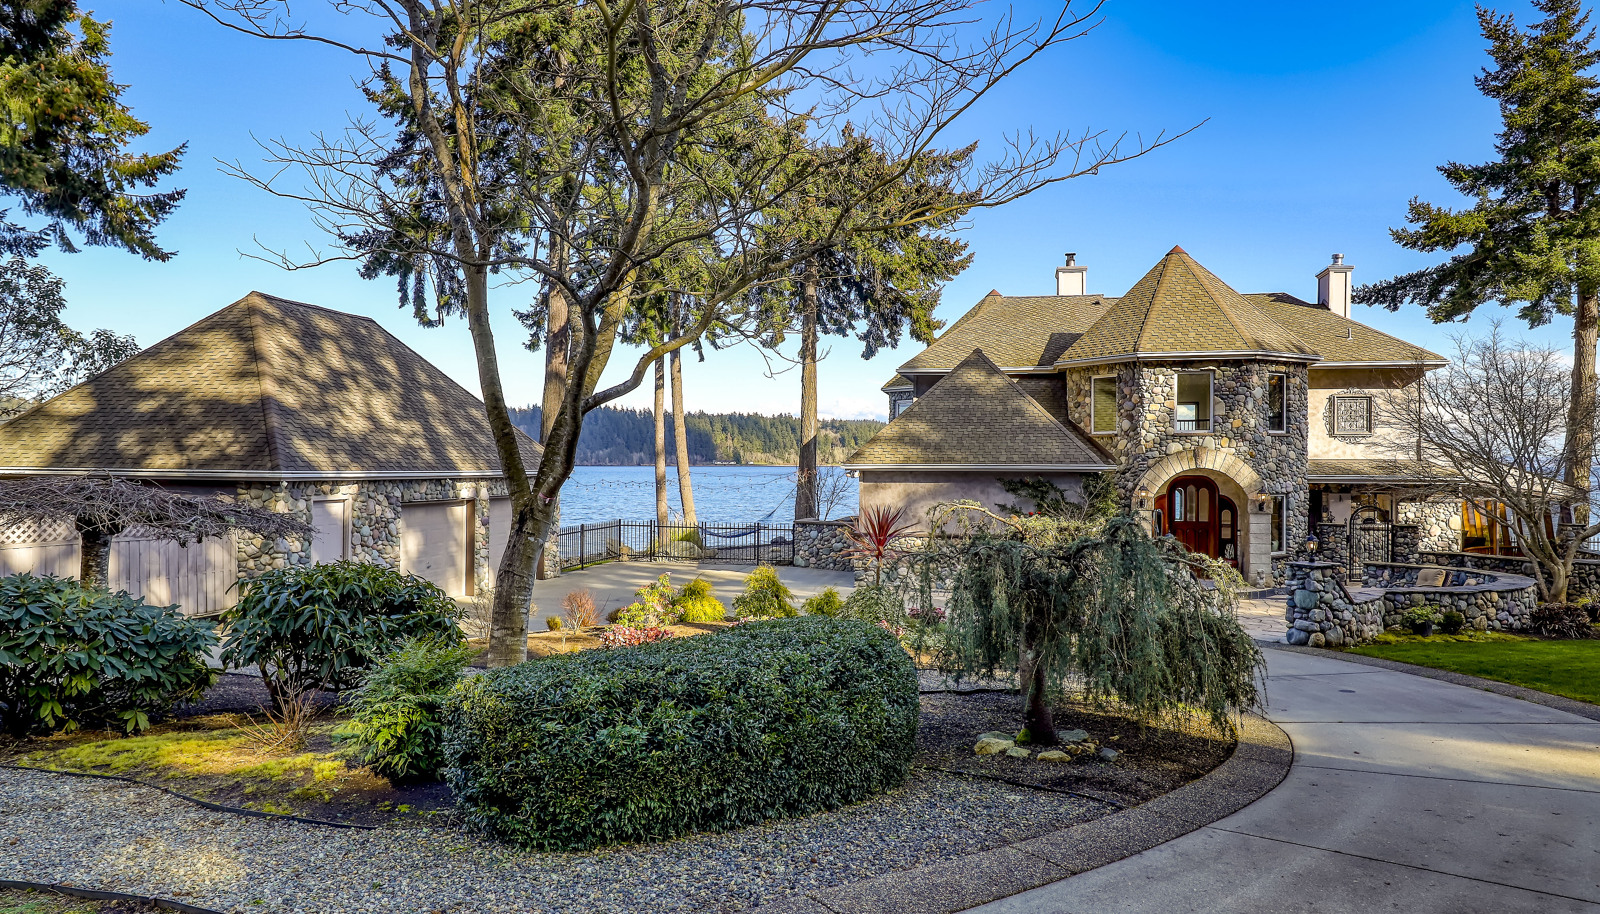 Circular drive, gorgeous landscaping, and water views in all directions!